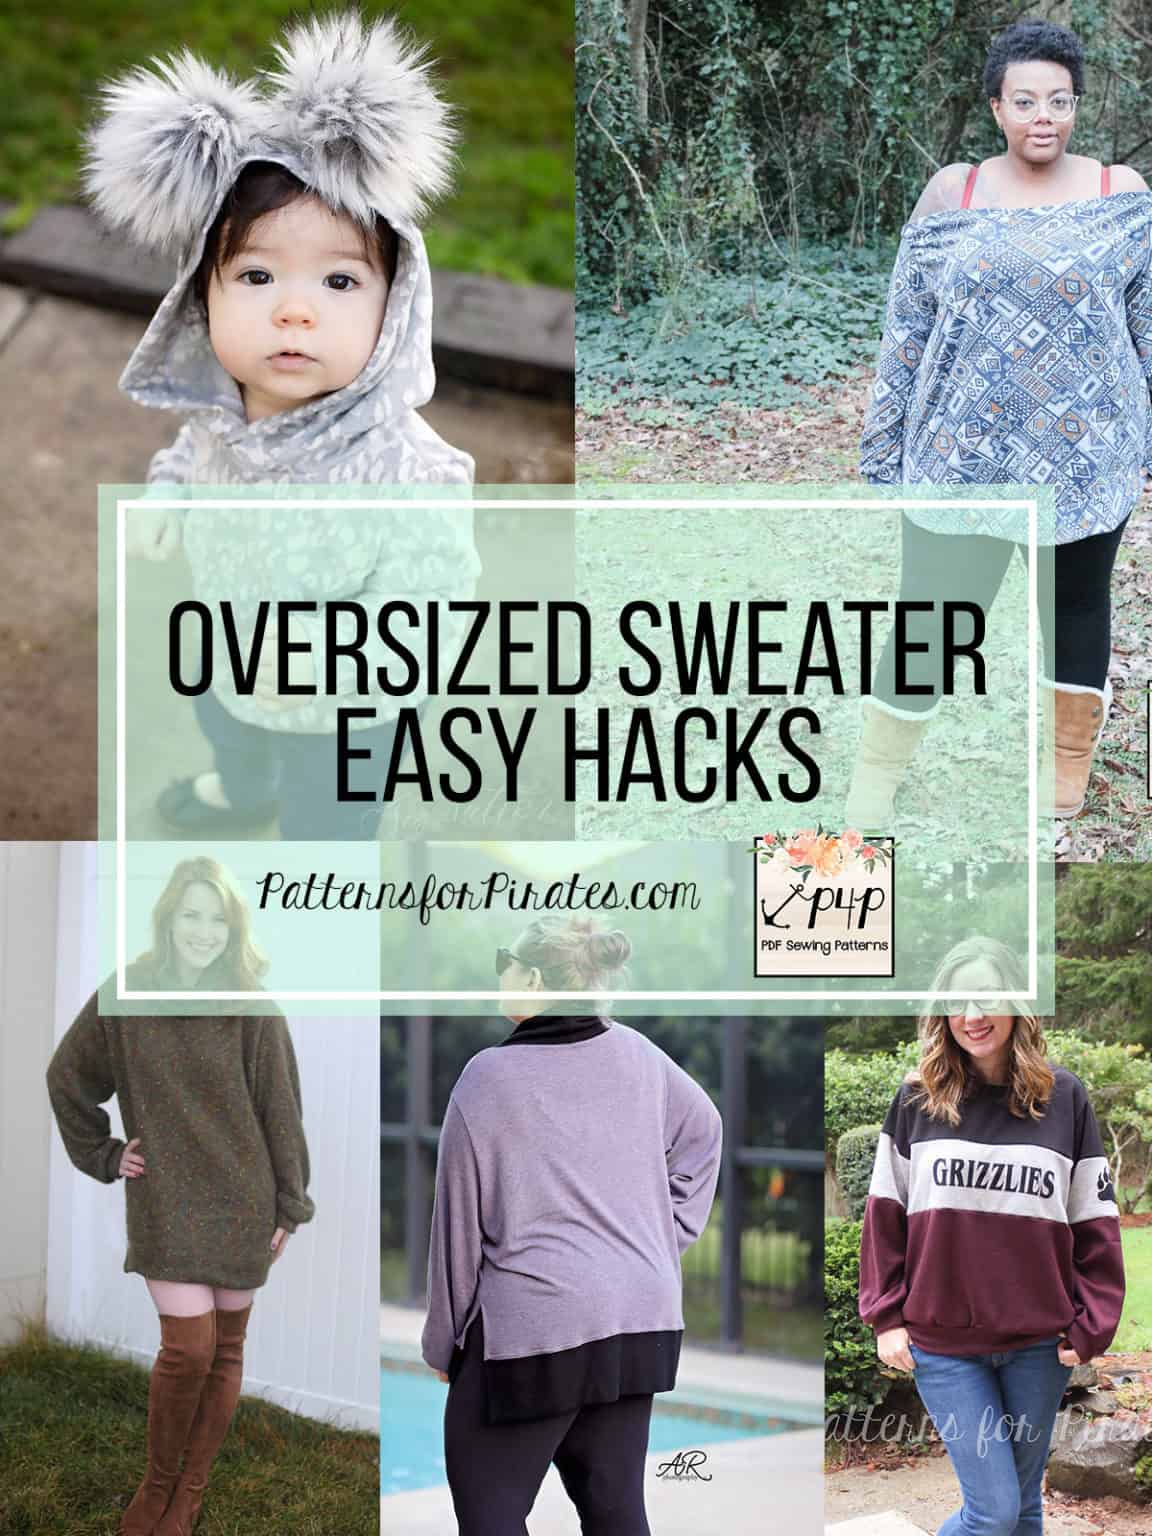 Oversized Sweater :: Easy Hacks - Patterns for Pirates